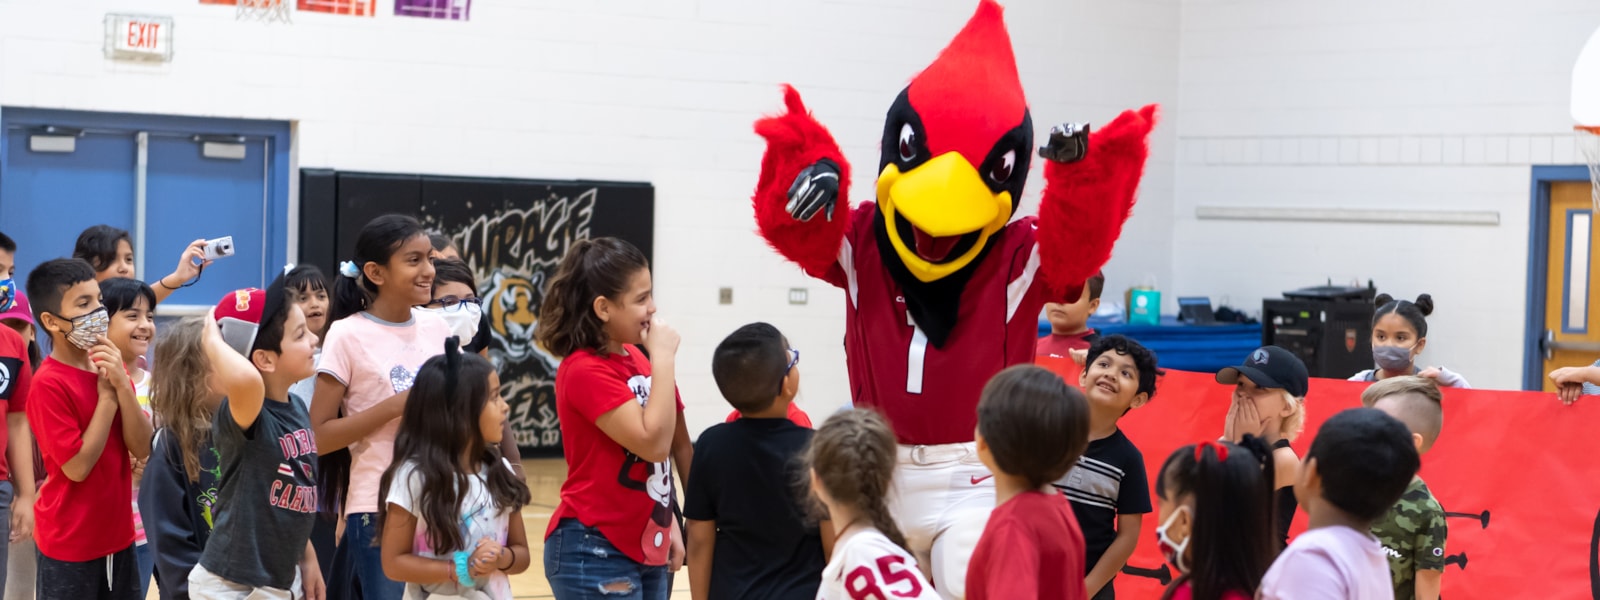 Big Red from the Arizona Cardinals speaks with children at El Mirage Elementary School.